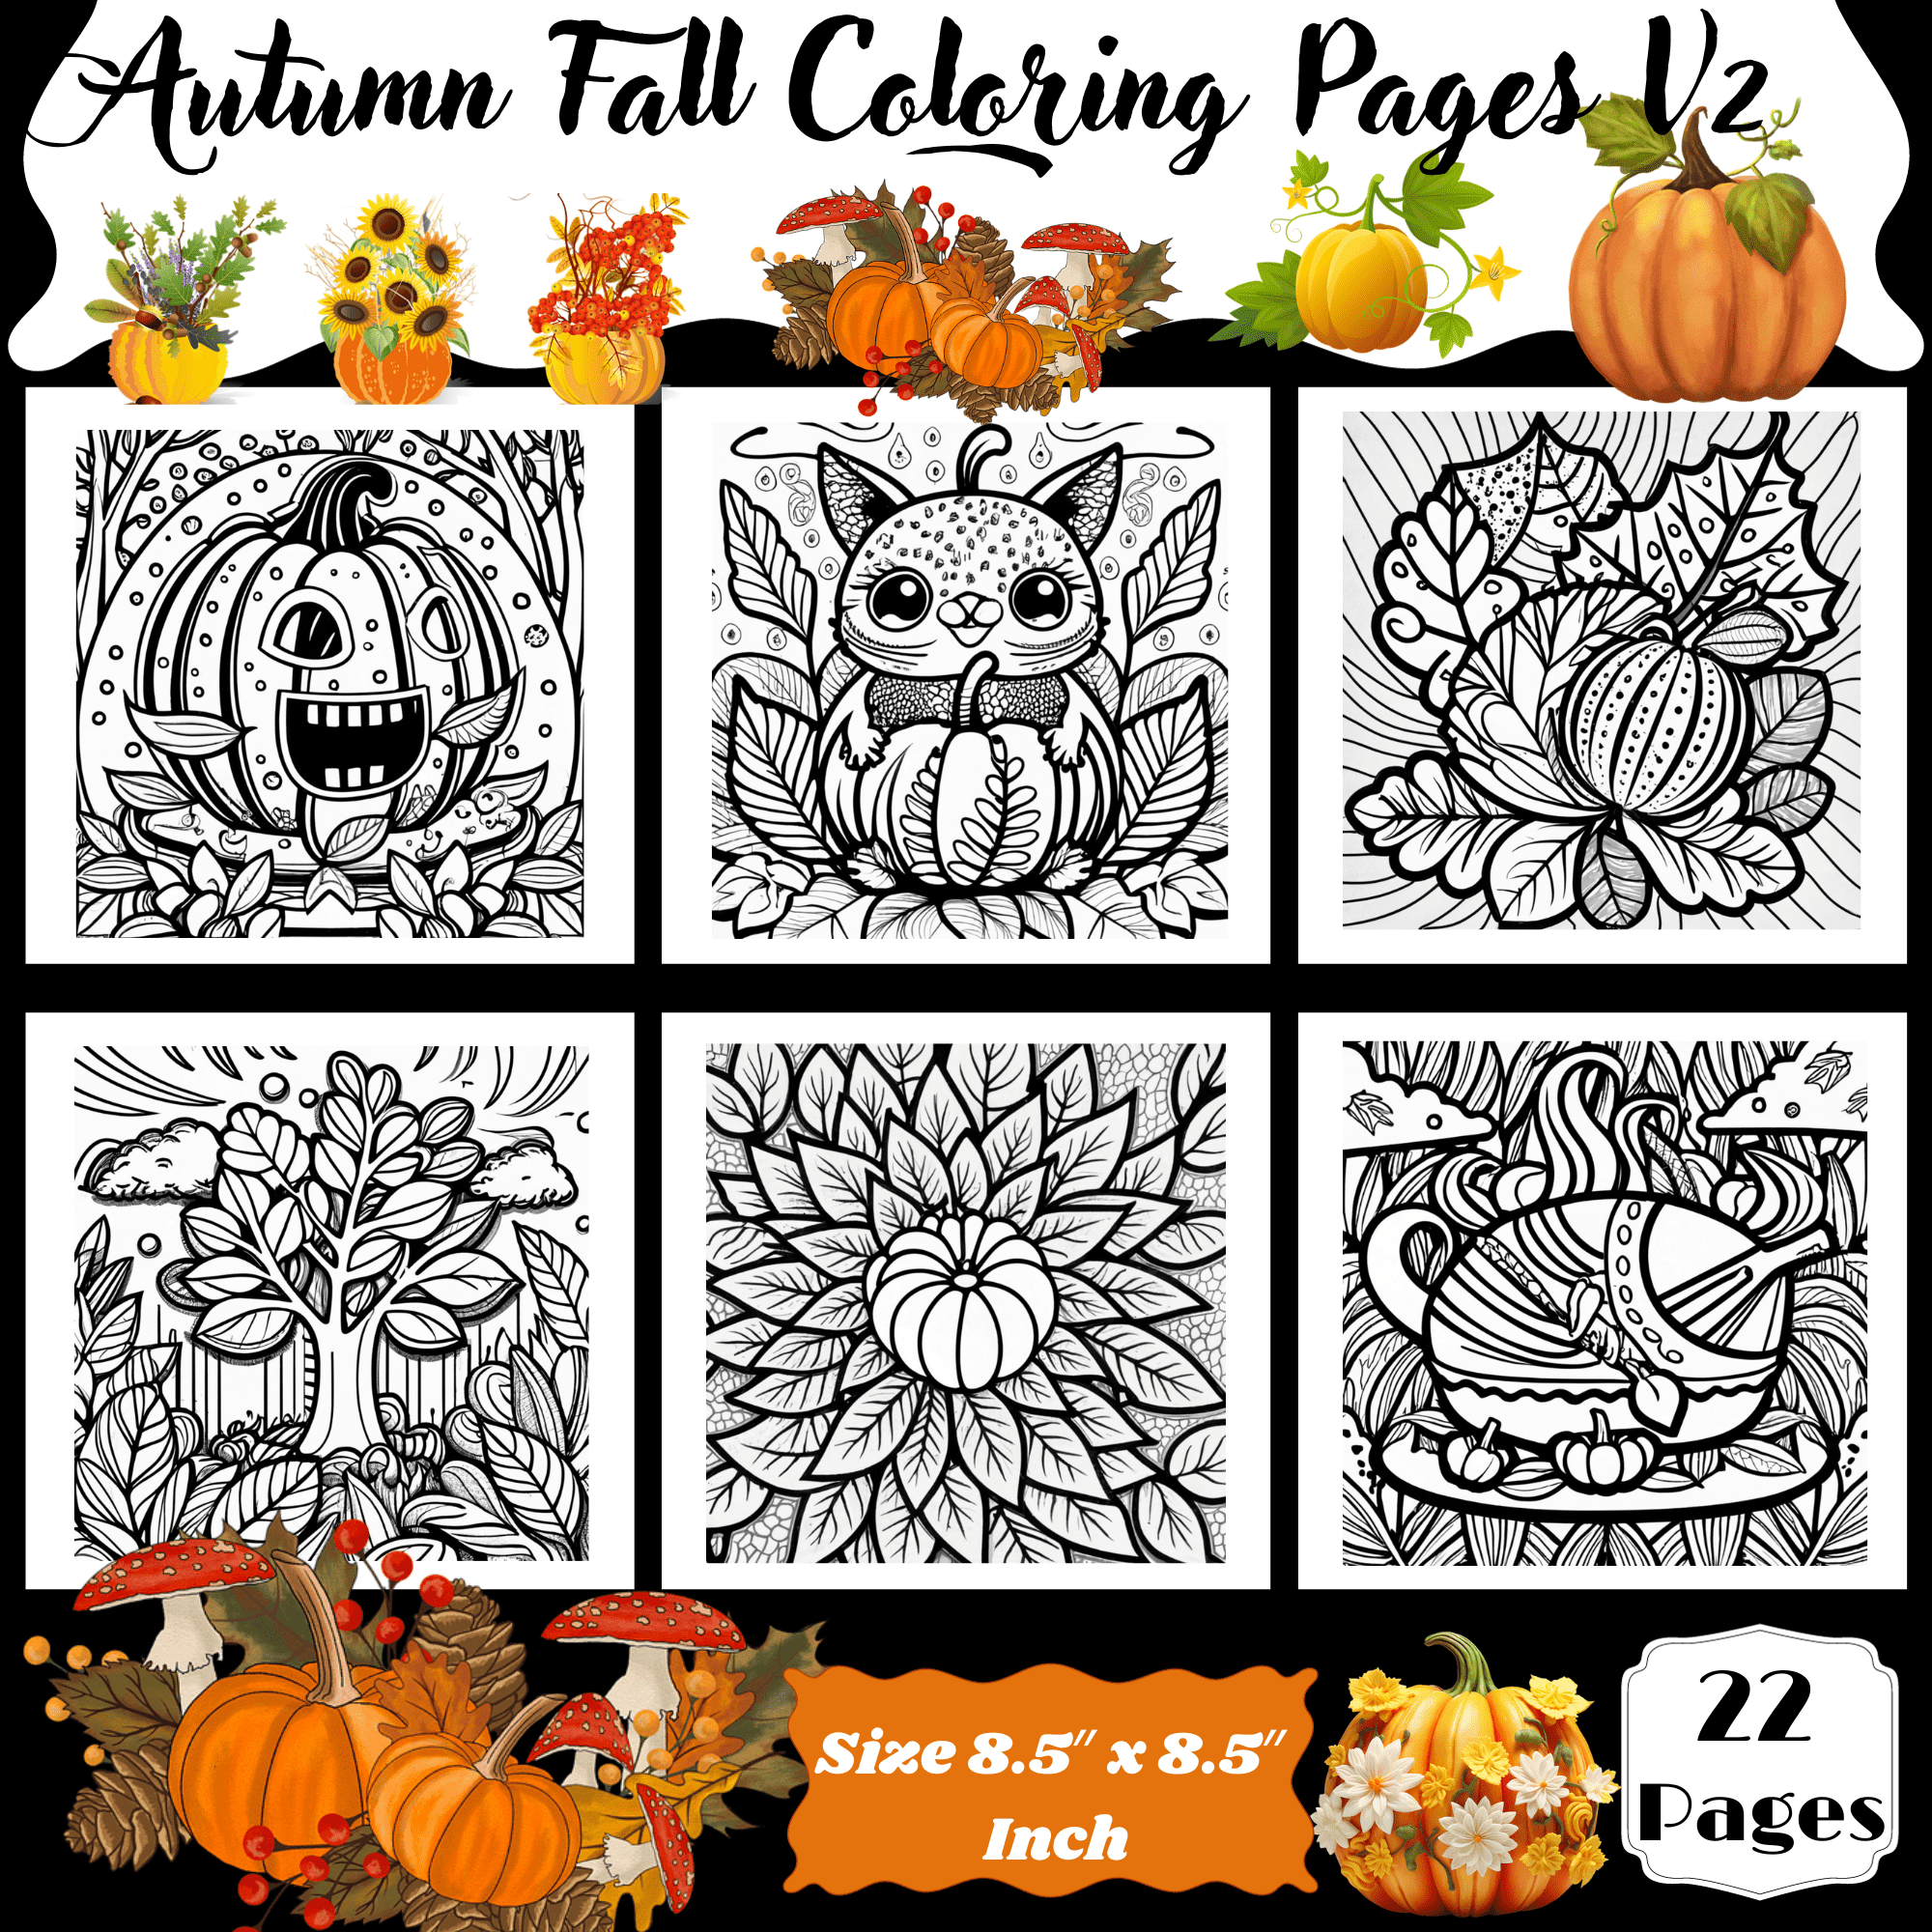 Autumn fall coloring pages